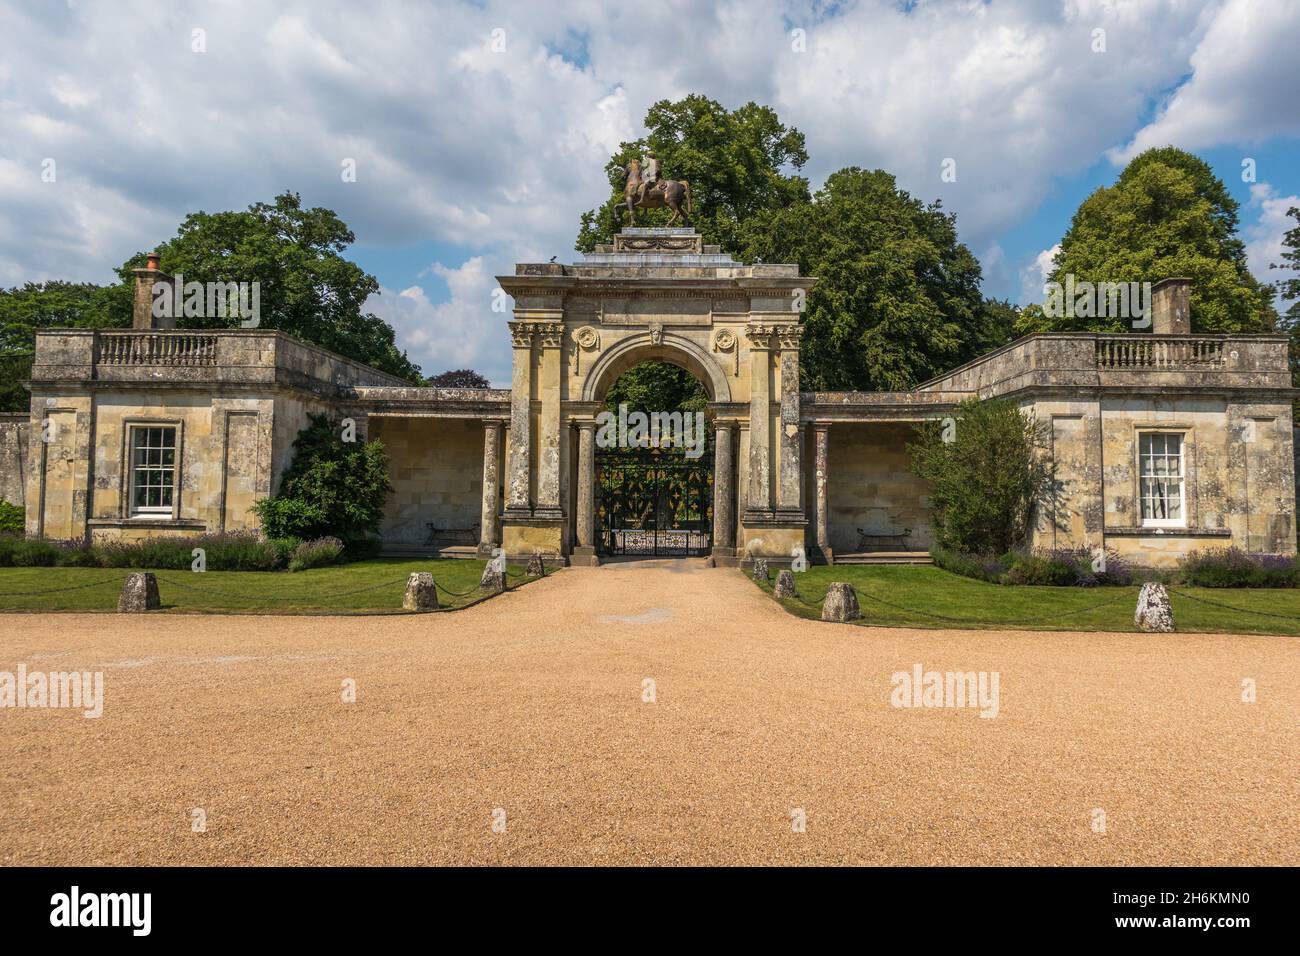 Entrance arched gate with Corinthian columns to Wilton House Wilton England with a statue of Marcus Aurelius on horseback and balustrade parapets Stock Photo